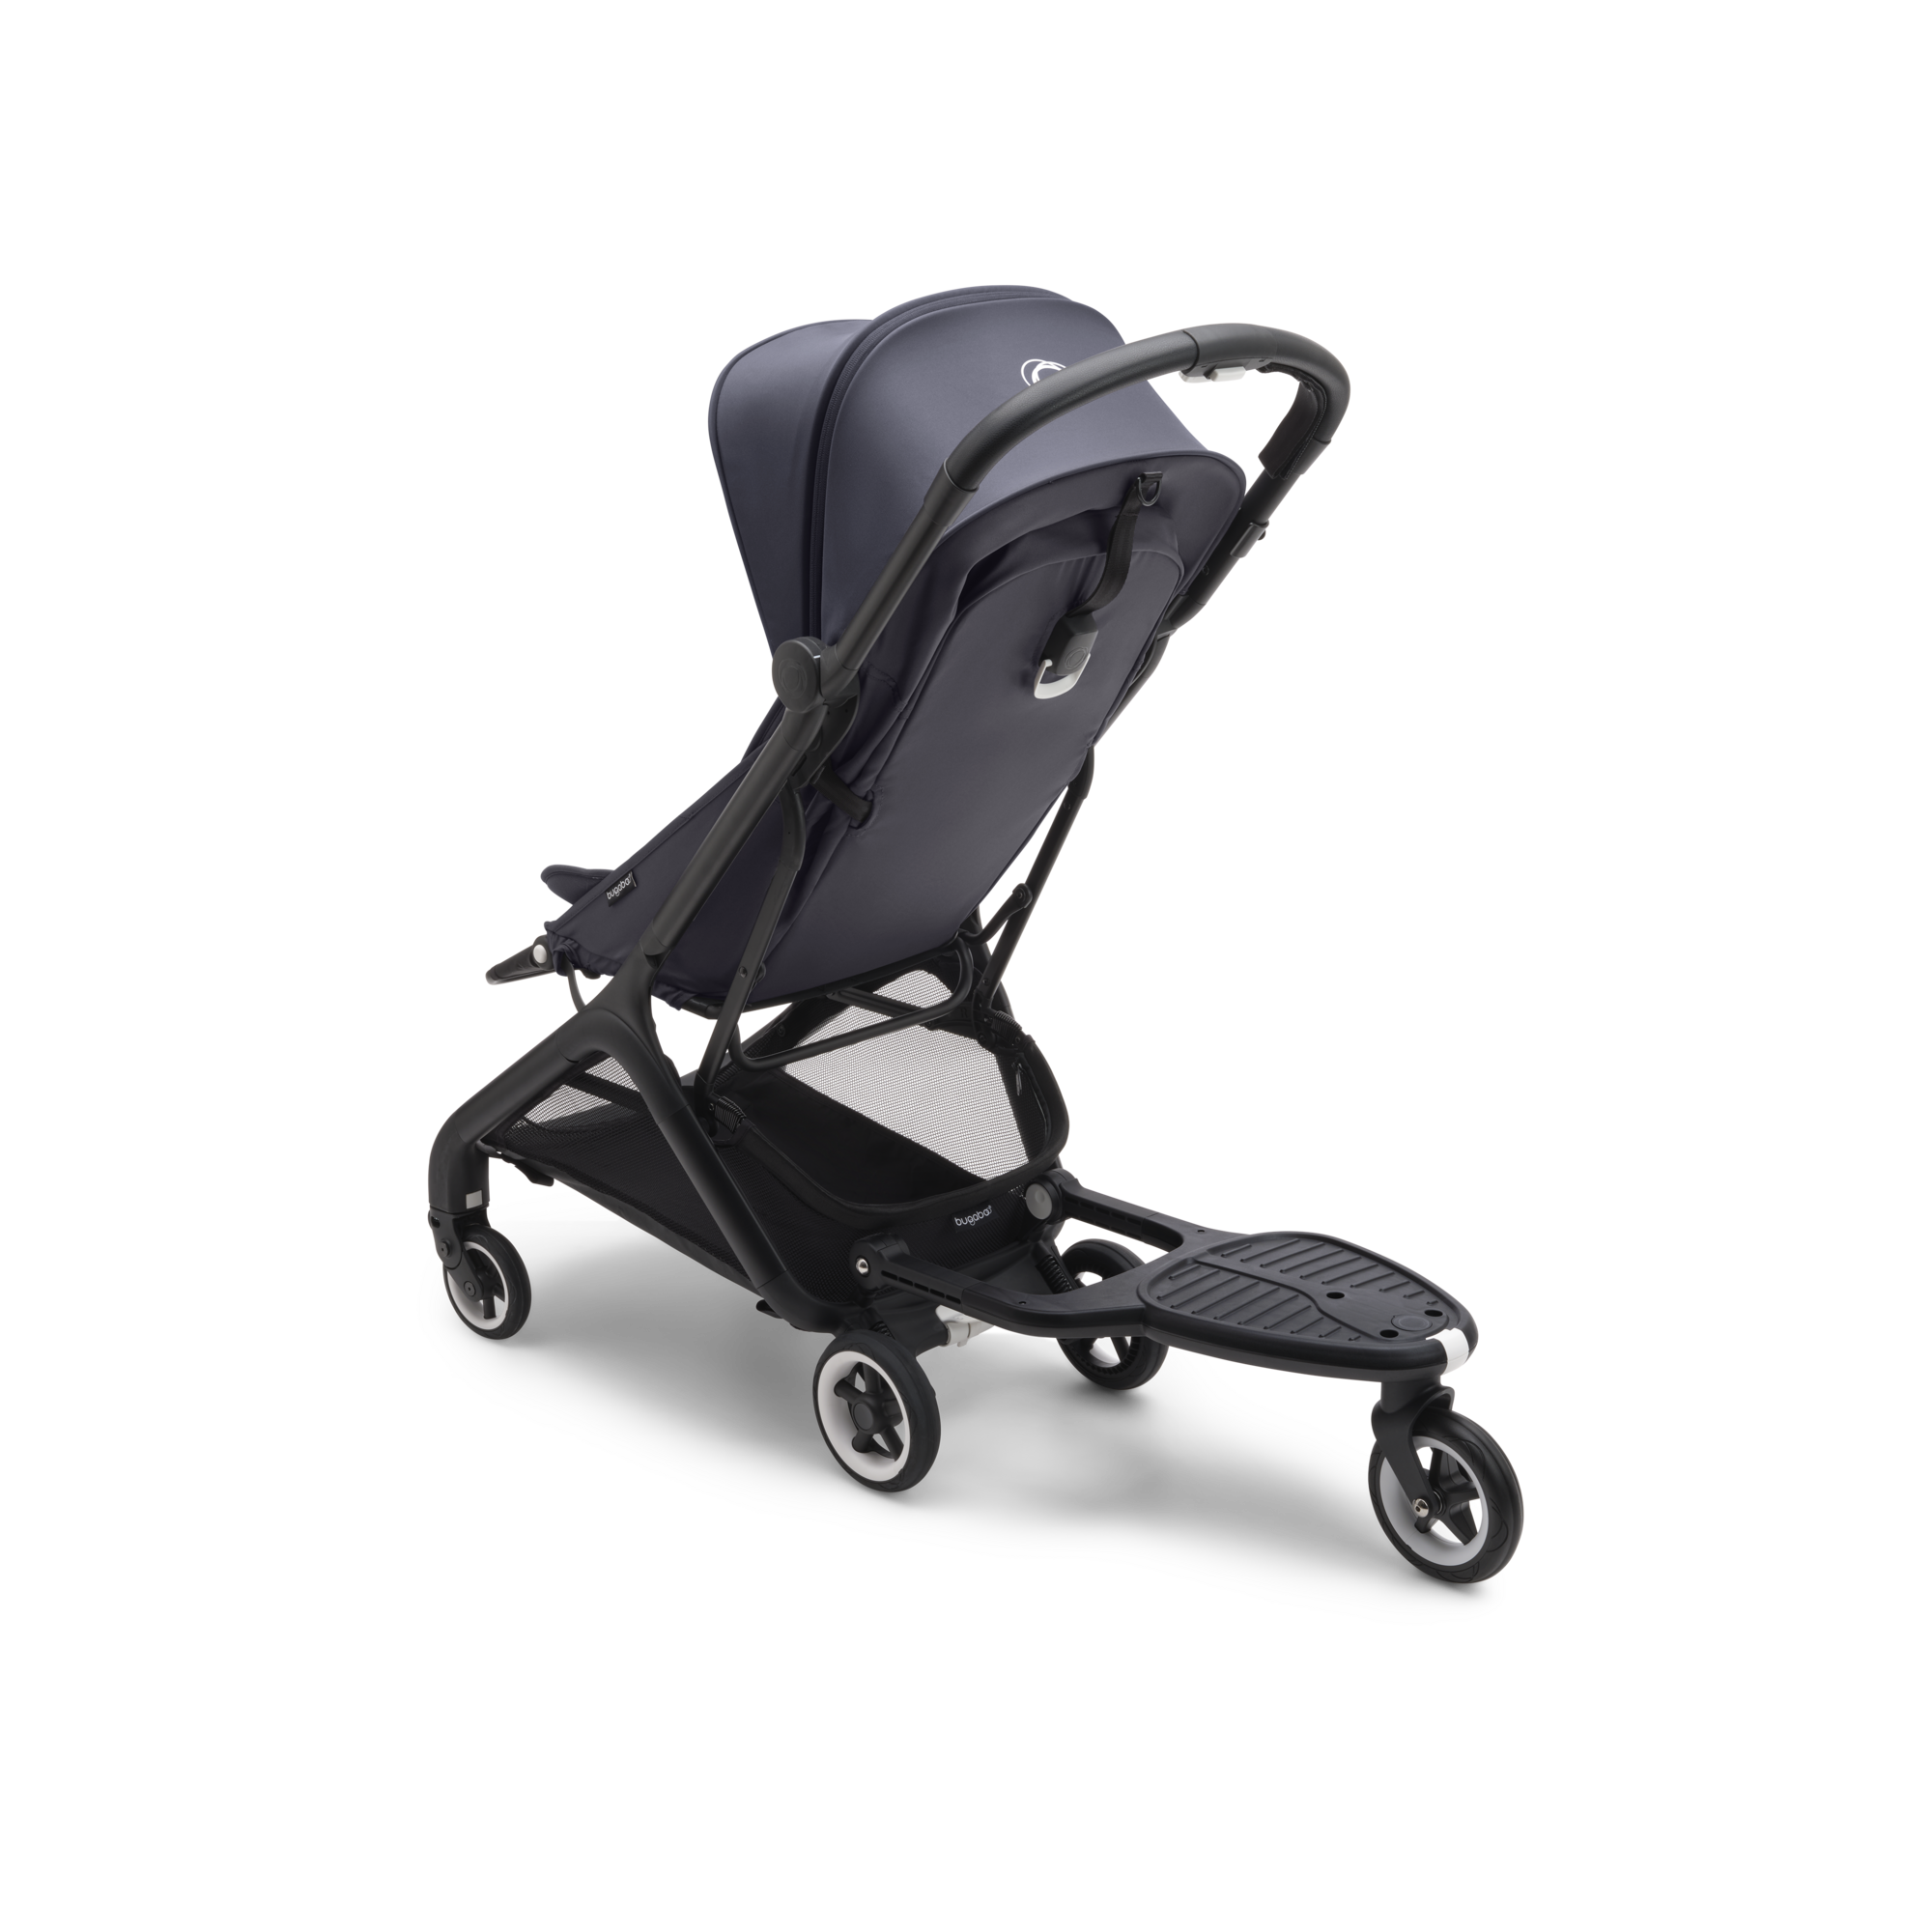 Patinete acoplado+ confort Bugaboo Butterfly Negro